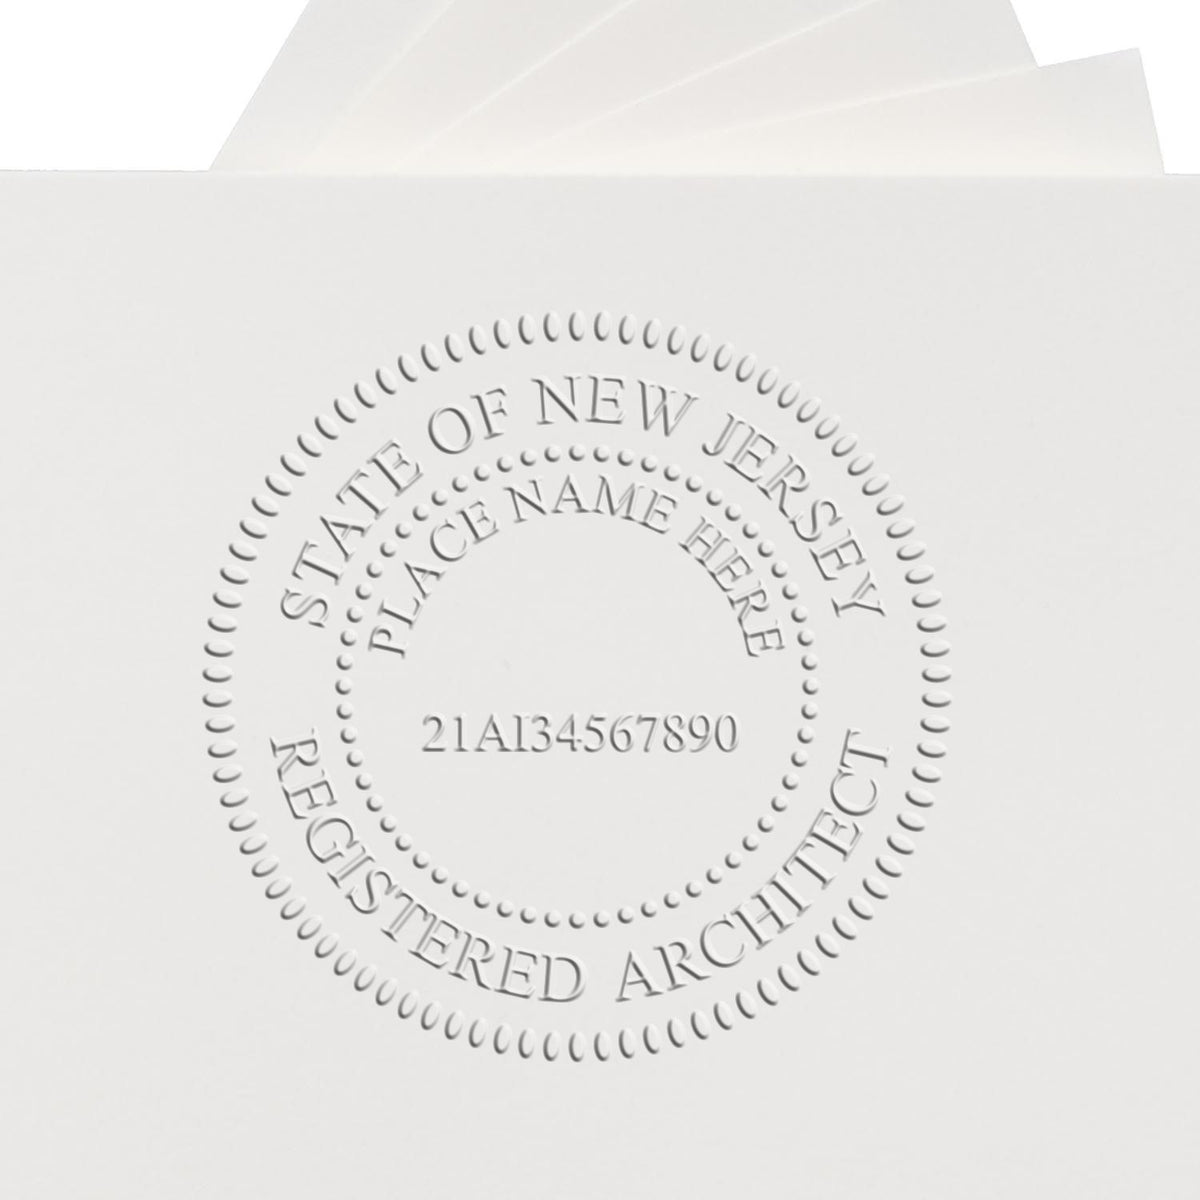 The State of New Jersey Architectural Seal Embosser stamp impression comes to life with a crisp, detailed photo on paper - showcasing true professional quality.